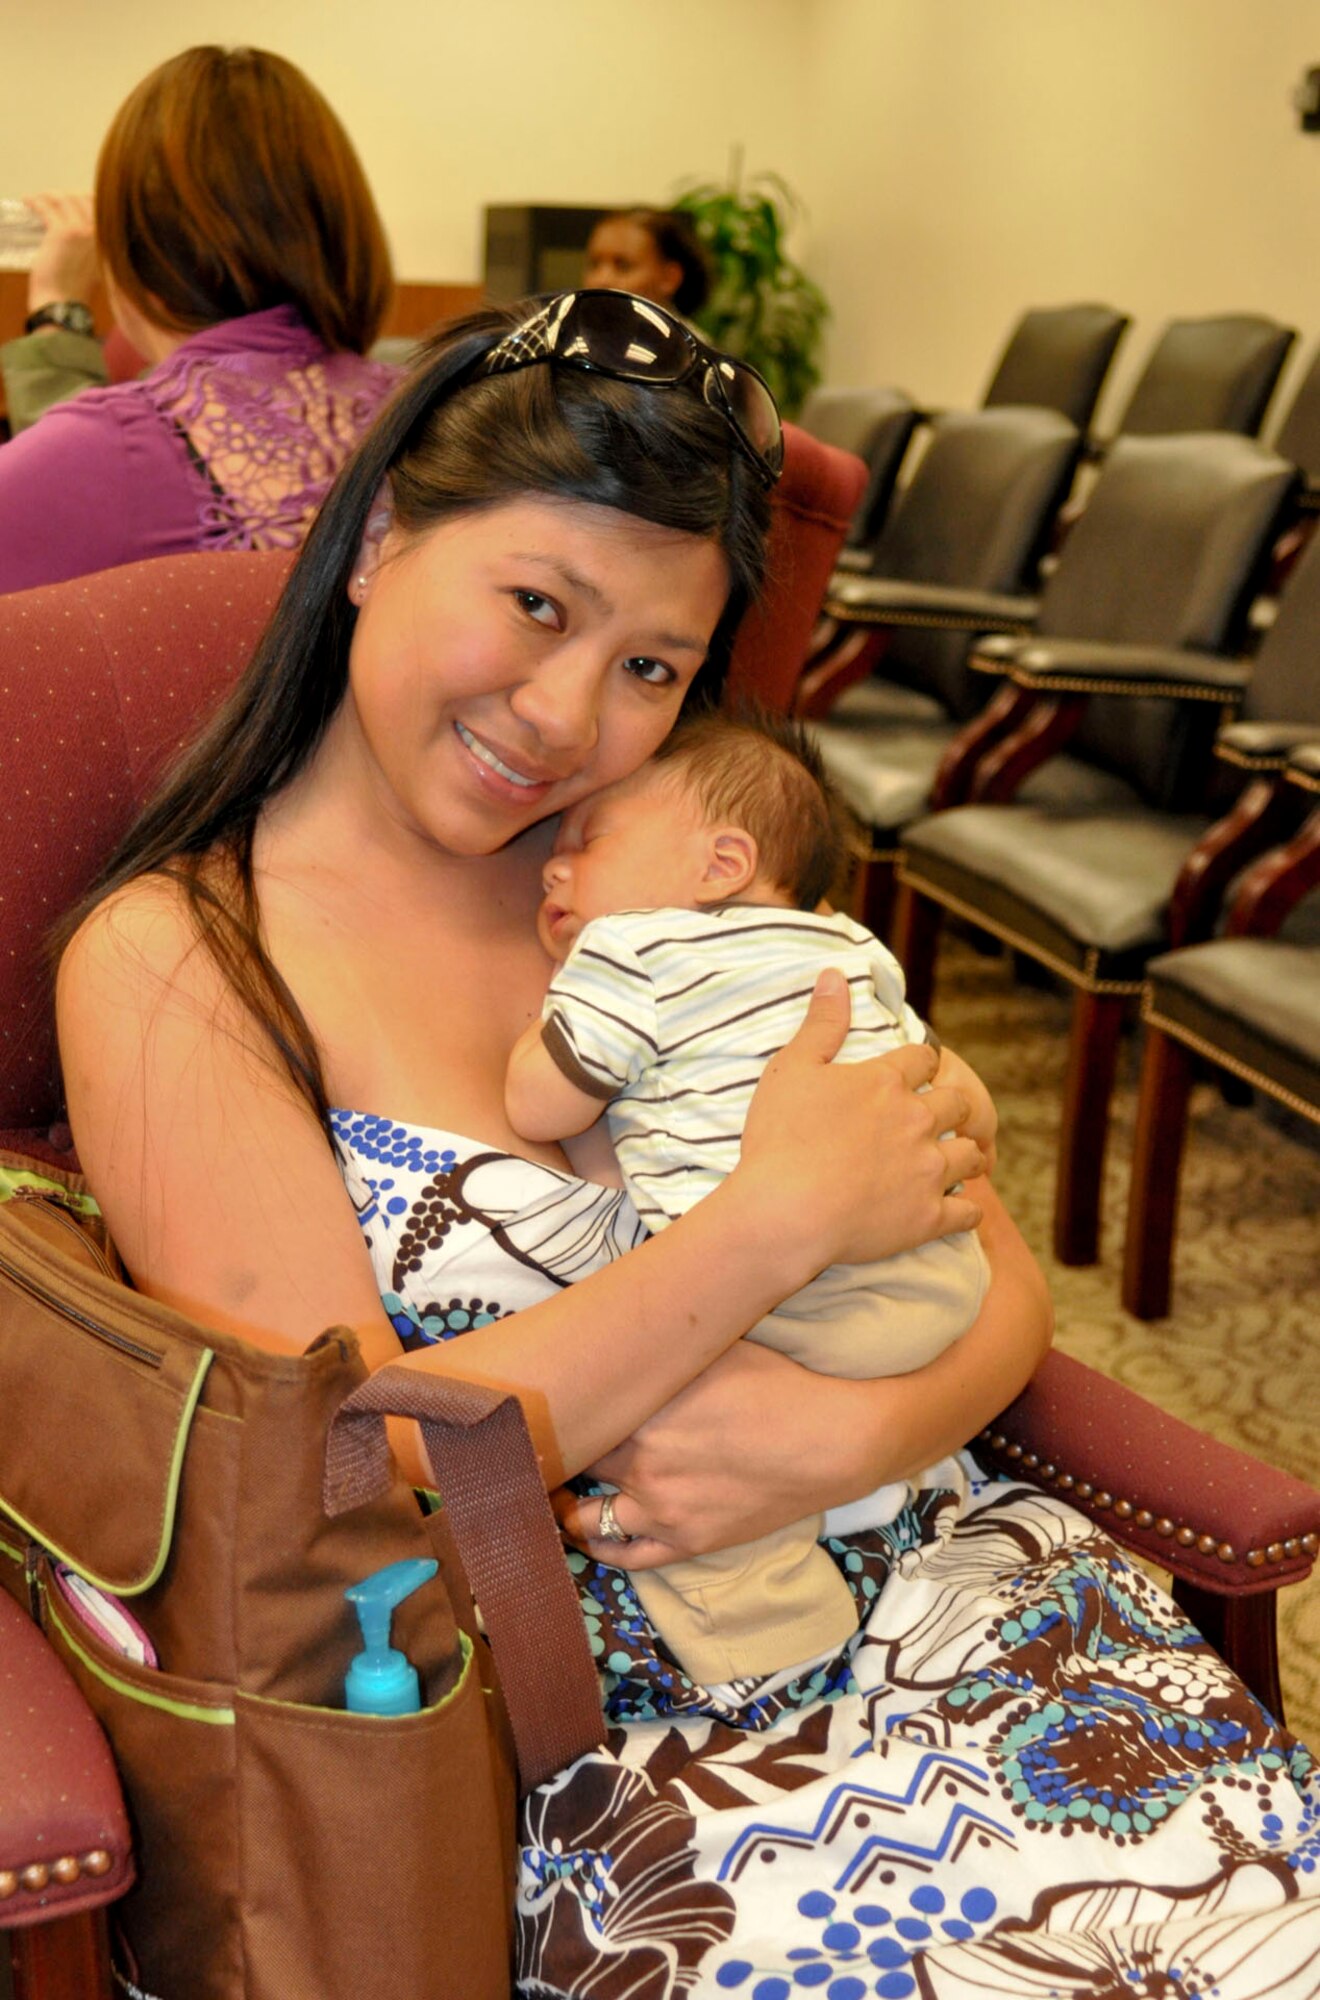 Master Sgt. Ellainne Bay, an air reserve technician with the 452nd Force Support Squadron, cuddles with her newborn son, Logan Bay, while waiting for the Bundles for Babies class to begin at March Air Reserve Base, Calif., June 7, 2011. Bundles for Babies is an Air Force Aid Society sponsored course that helps expectant parents be prepared for the costs of raising a child. (U.S. Air Force photo/Megan Just)